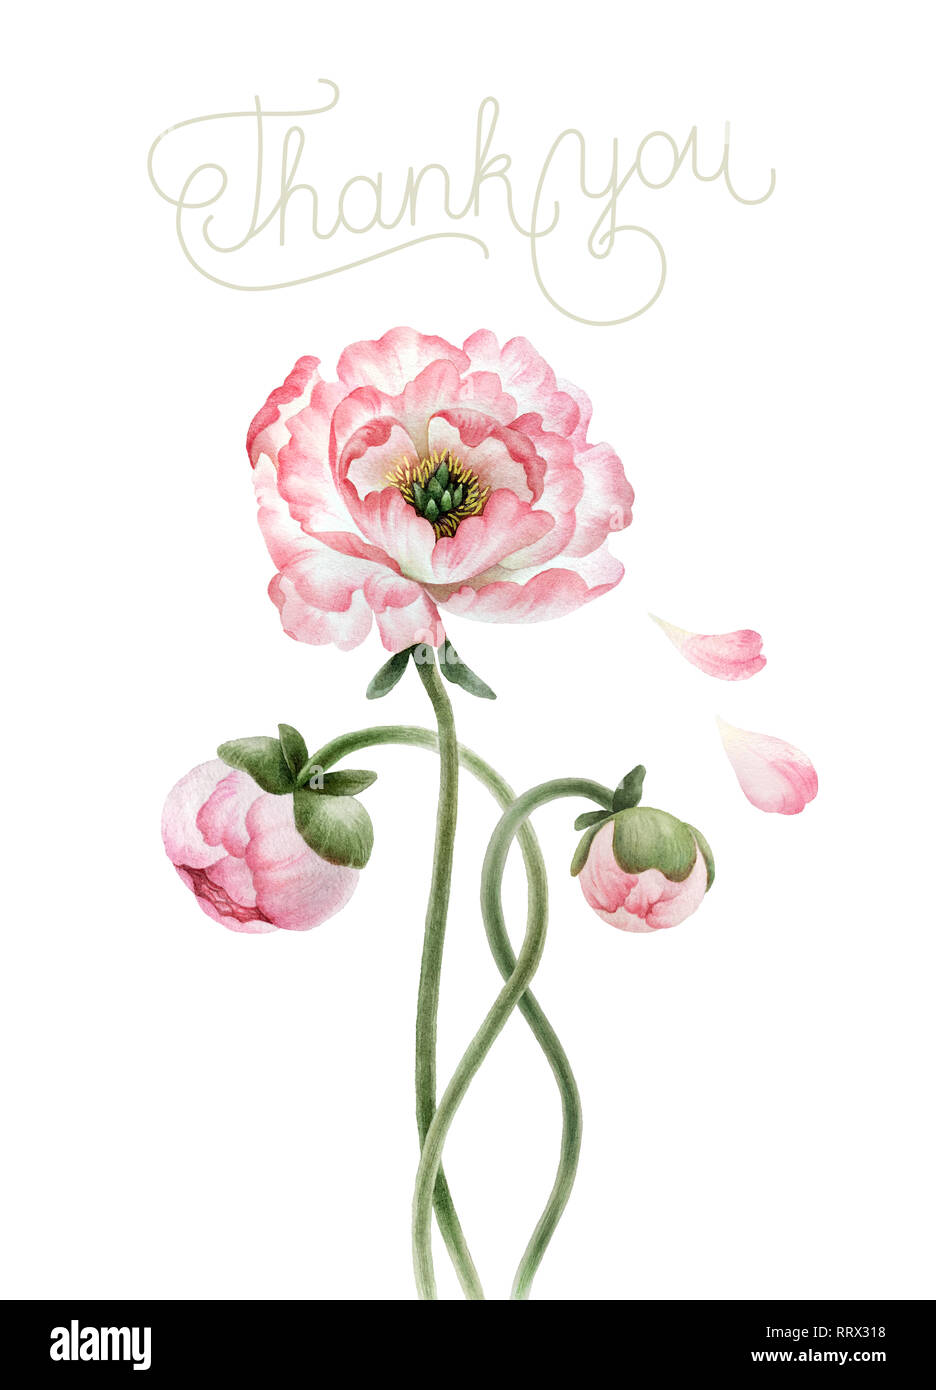 Bouquet of beautiful watercolor peonies and inscription isolated on white background. Botany watercolor peonies for design, postcards, banners, emblem Stock Photo